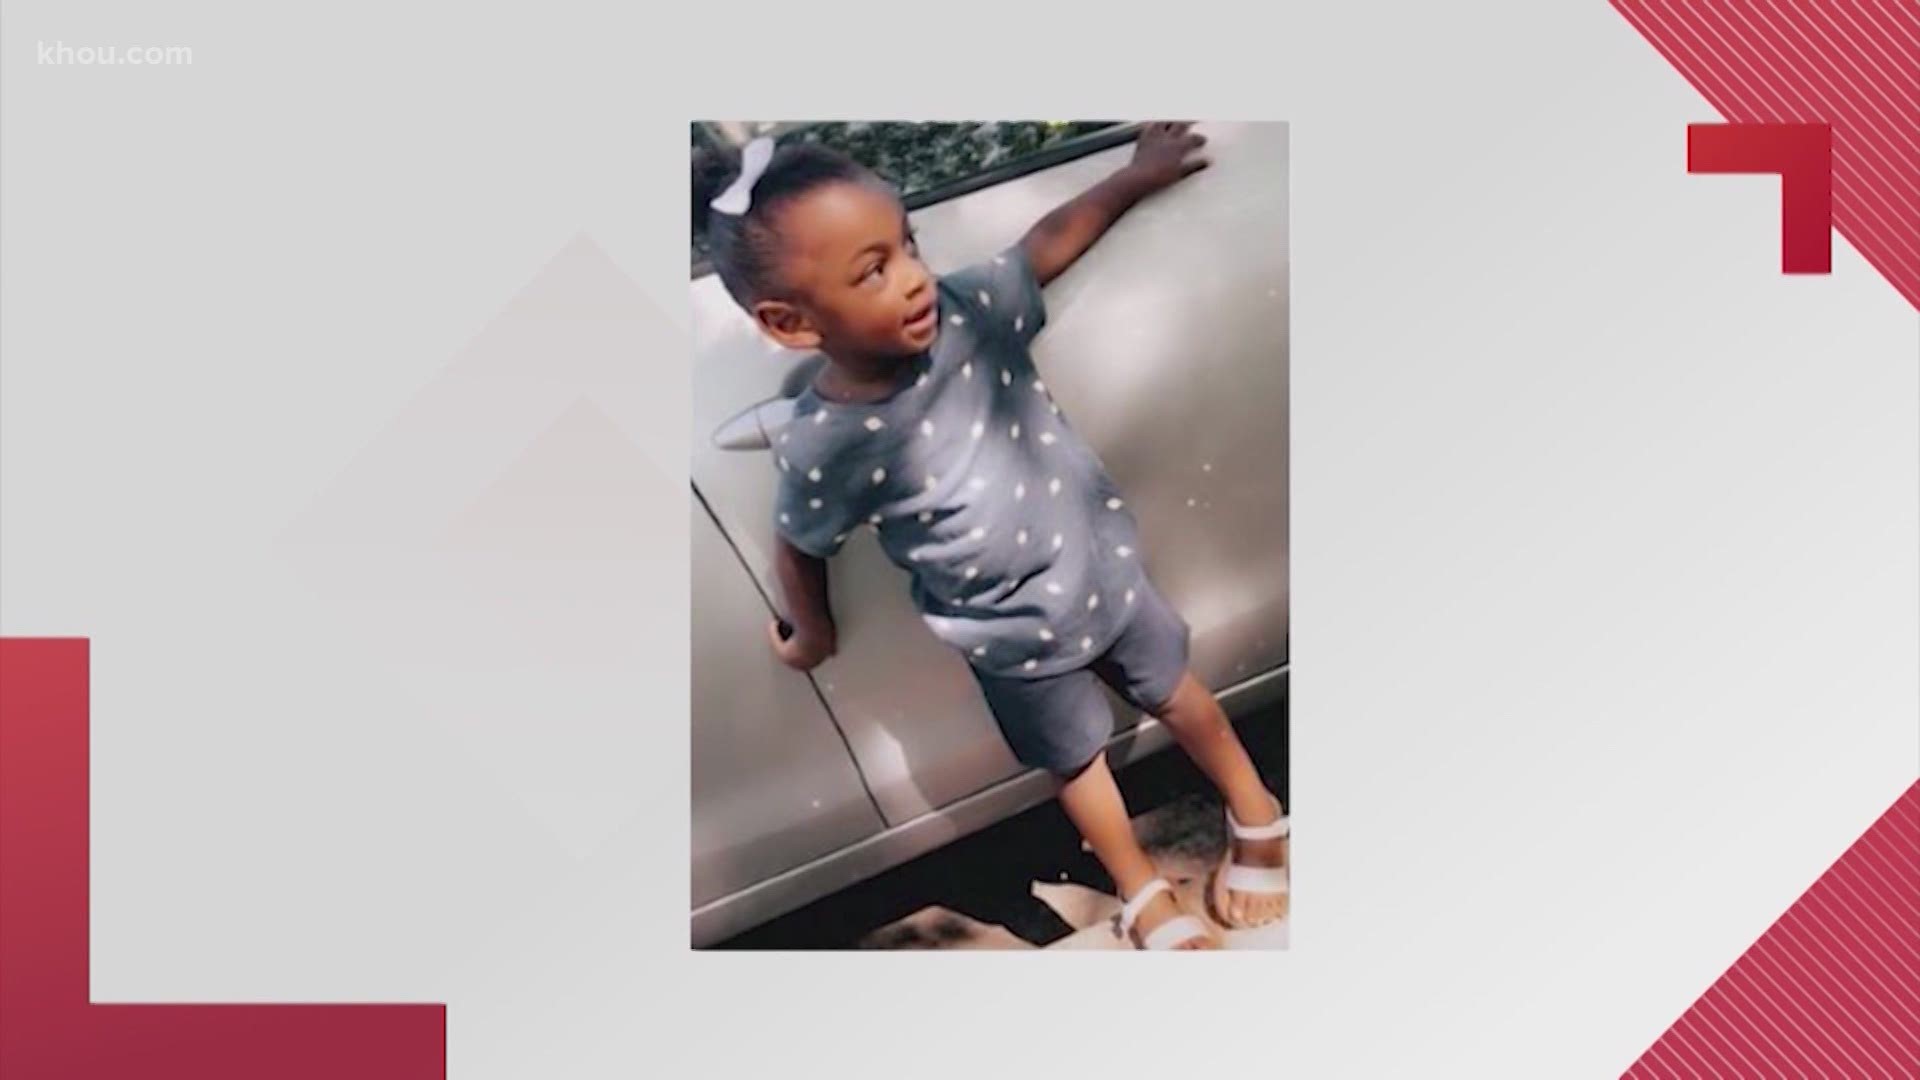 Foul play is suspected in Maliyah Bass' disappearance, according to HPD Chief Art Acevedo. The 2-year-old's body was found Sunday morning near Brays Bayou.